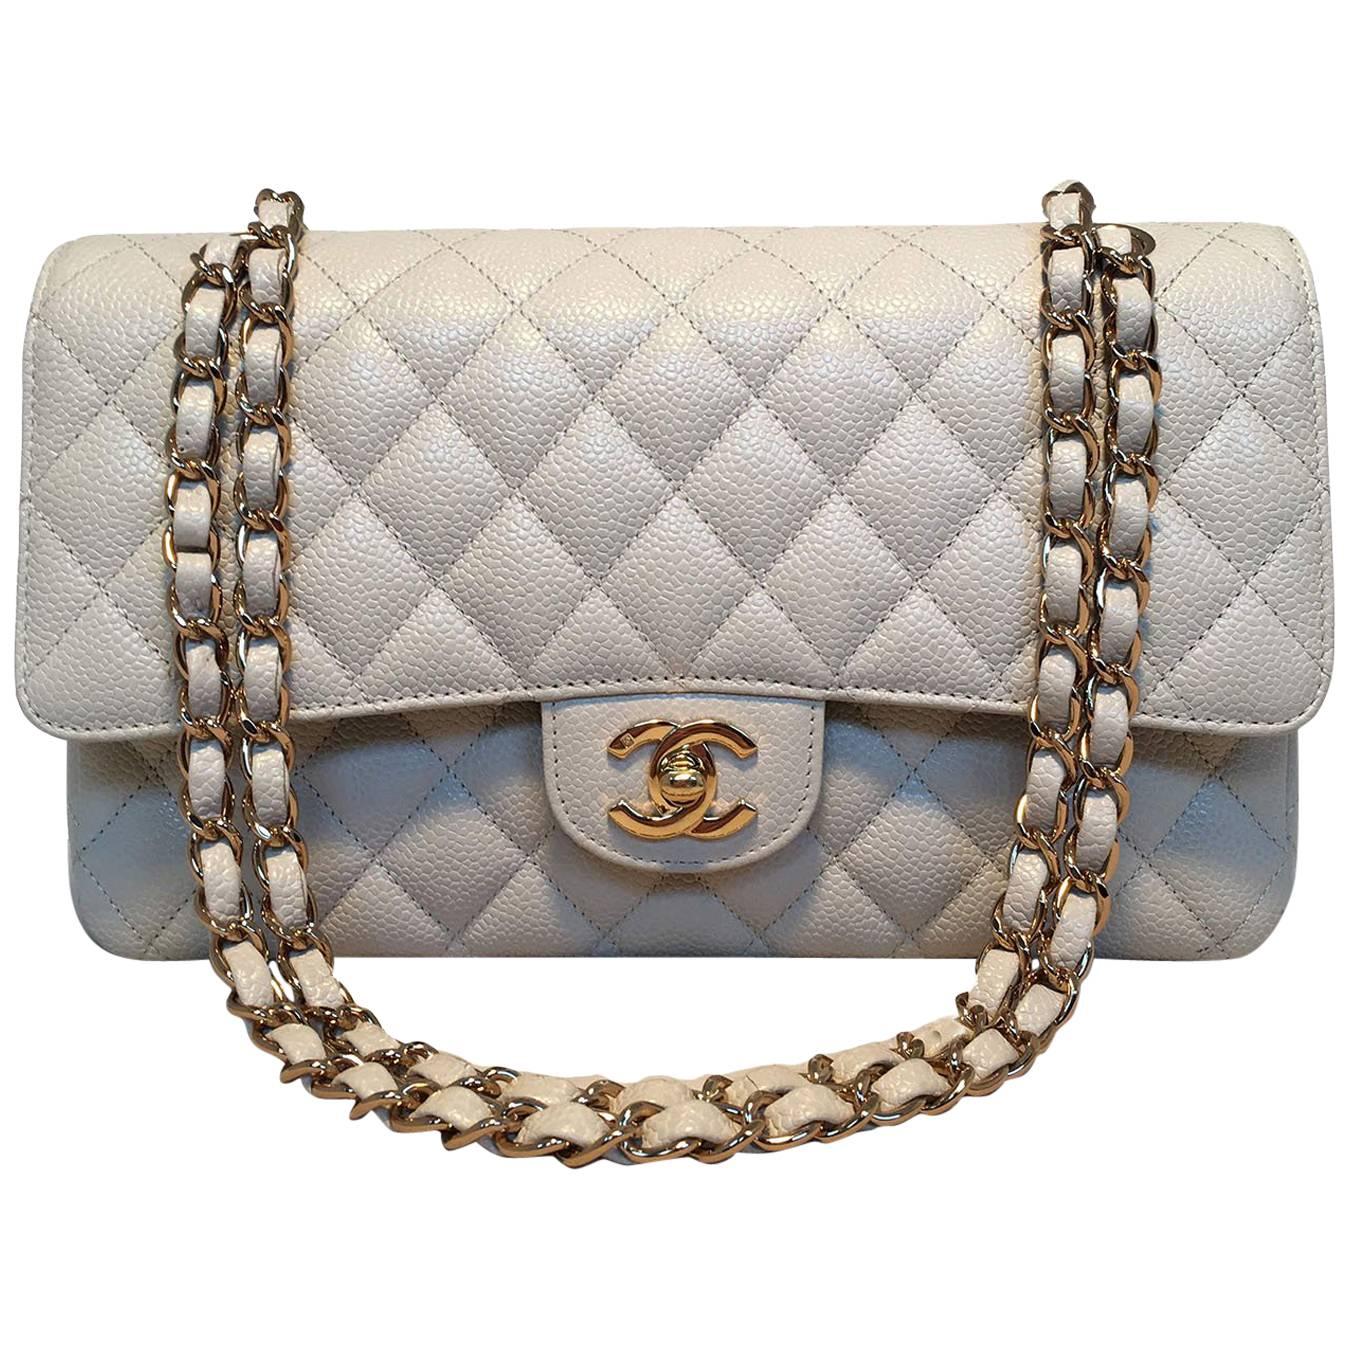 Vintage and Musthaves. Chanel medium/large 2.55 timeless classic single  flap bag